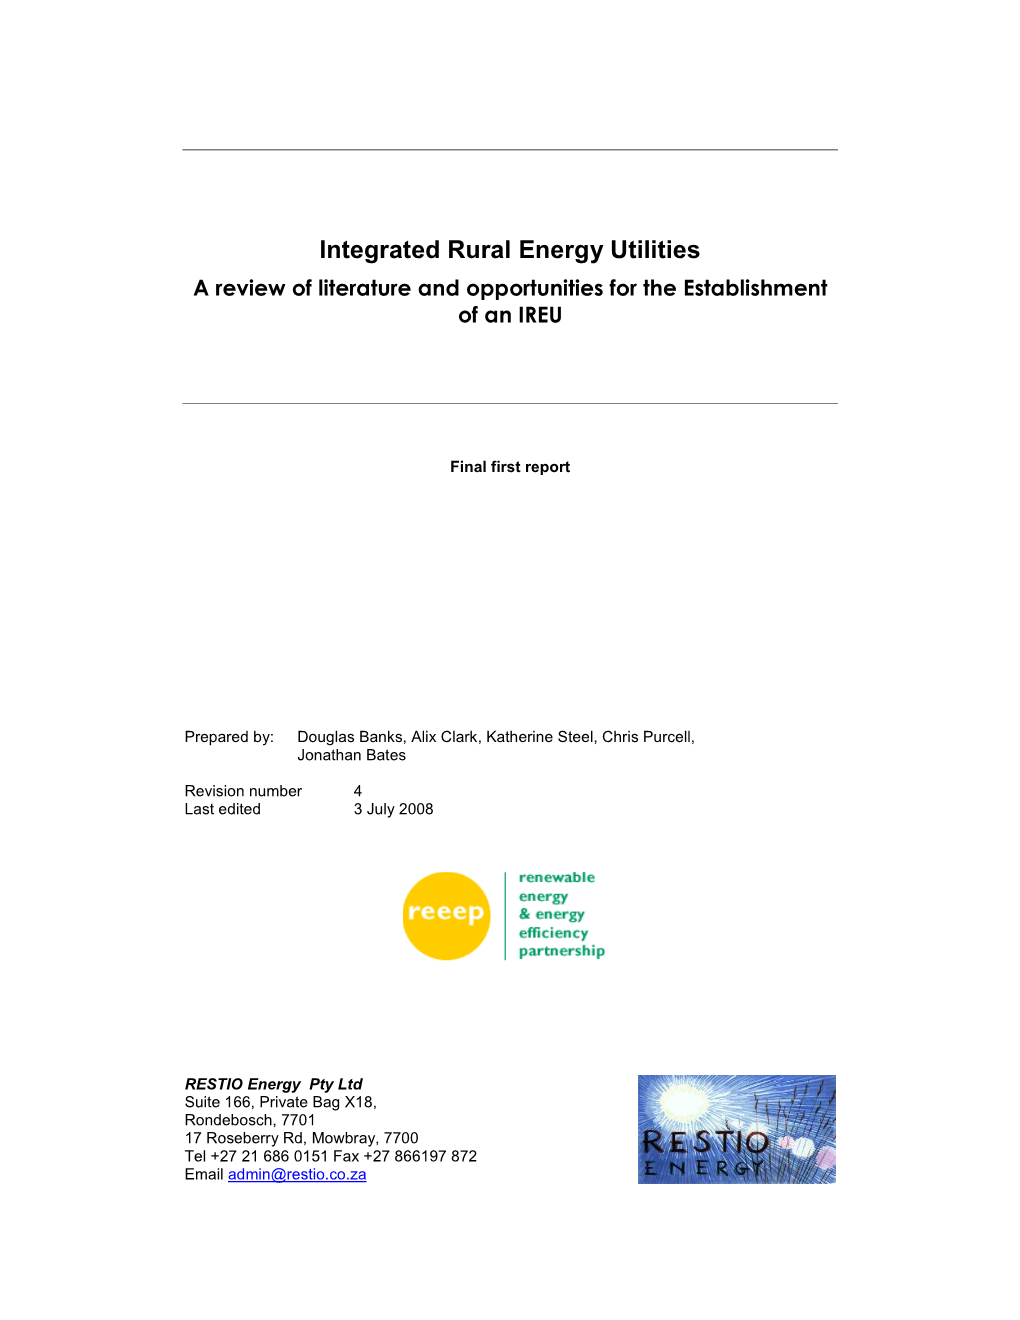 Integrated Rural Energy Utilities a Review of Literature and Opportunities for the Establishment of an IREU